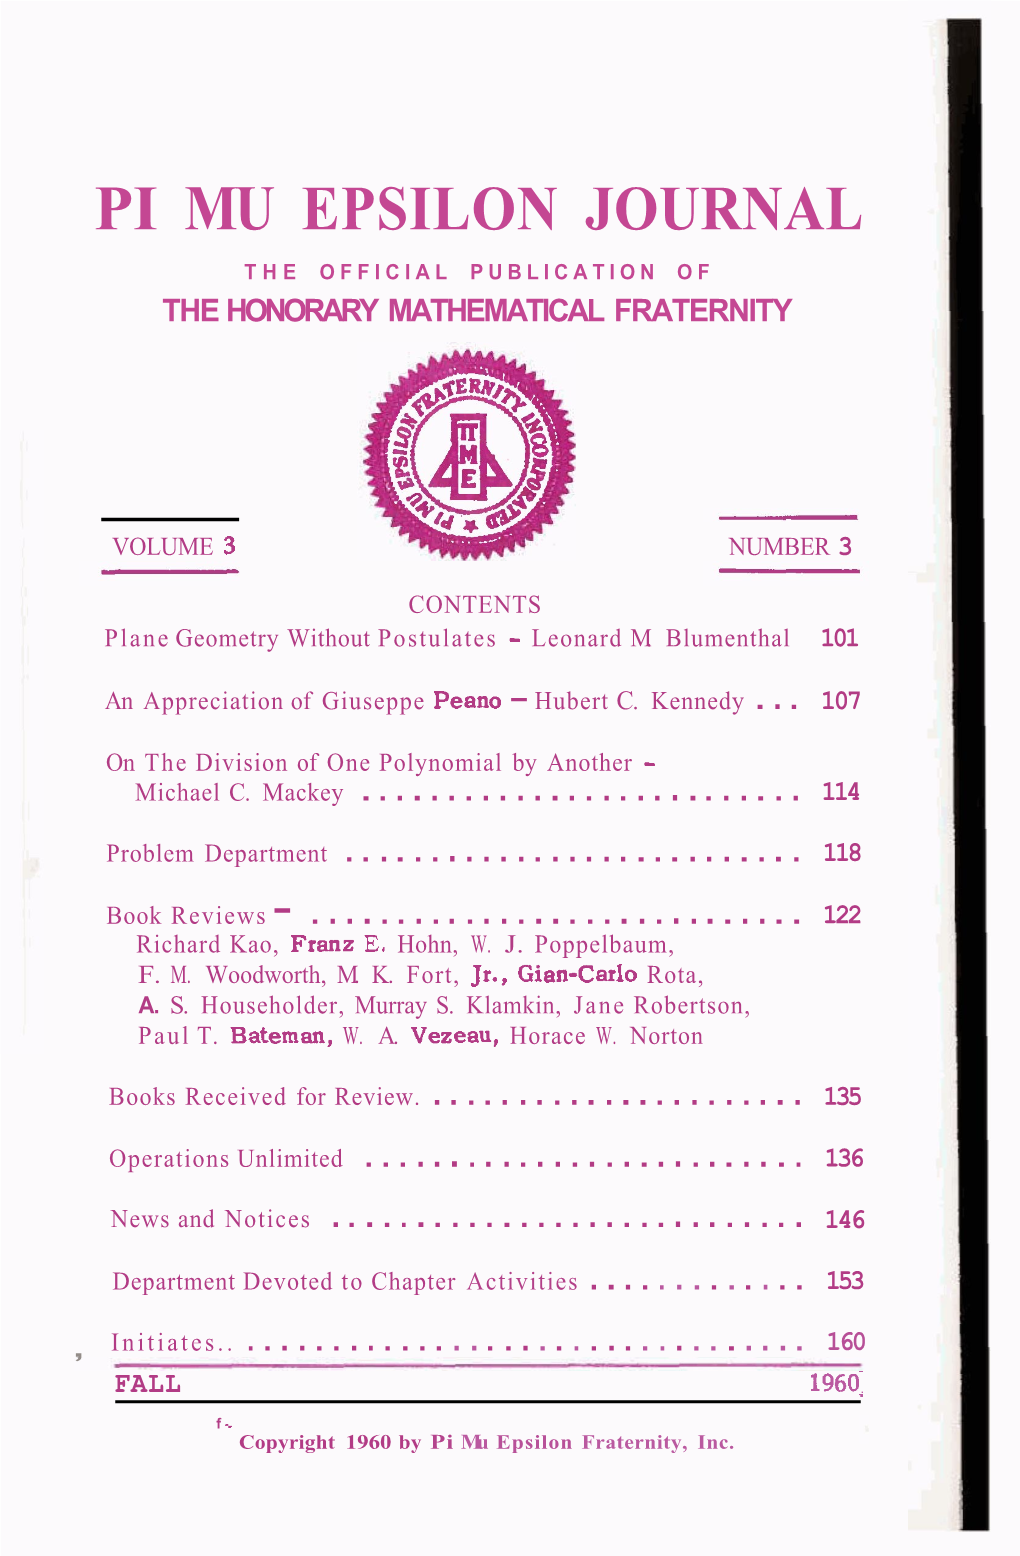 Pi Mu Epsilon Journal the Official Publication of the Honorary Mathematical Fraternity